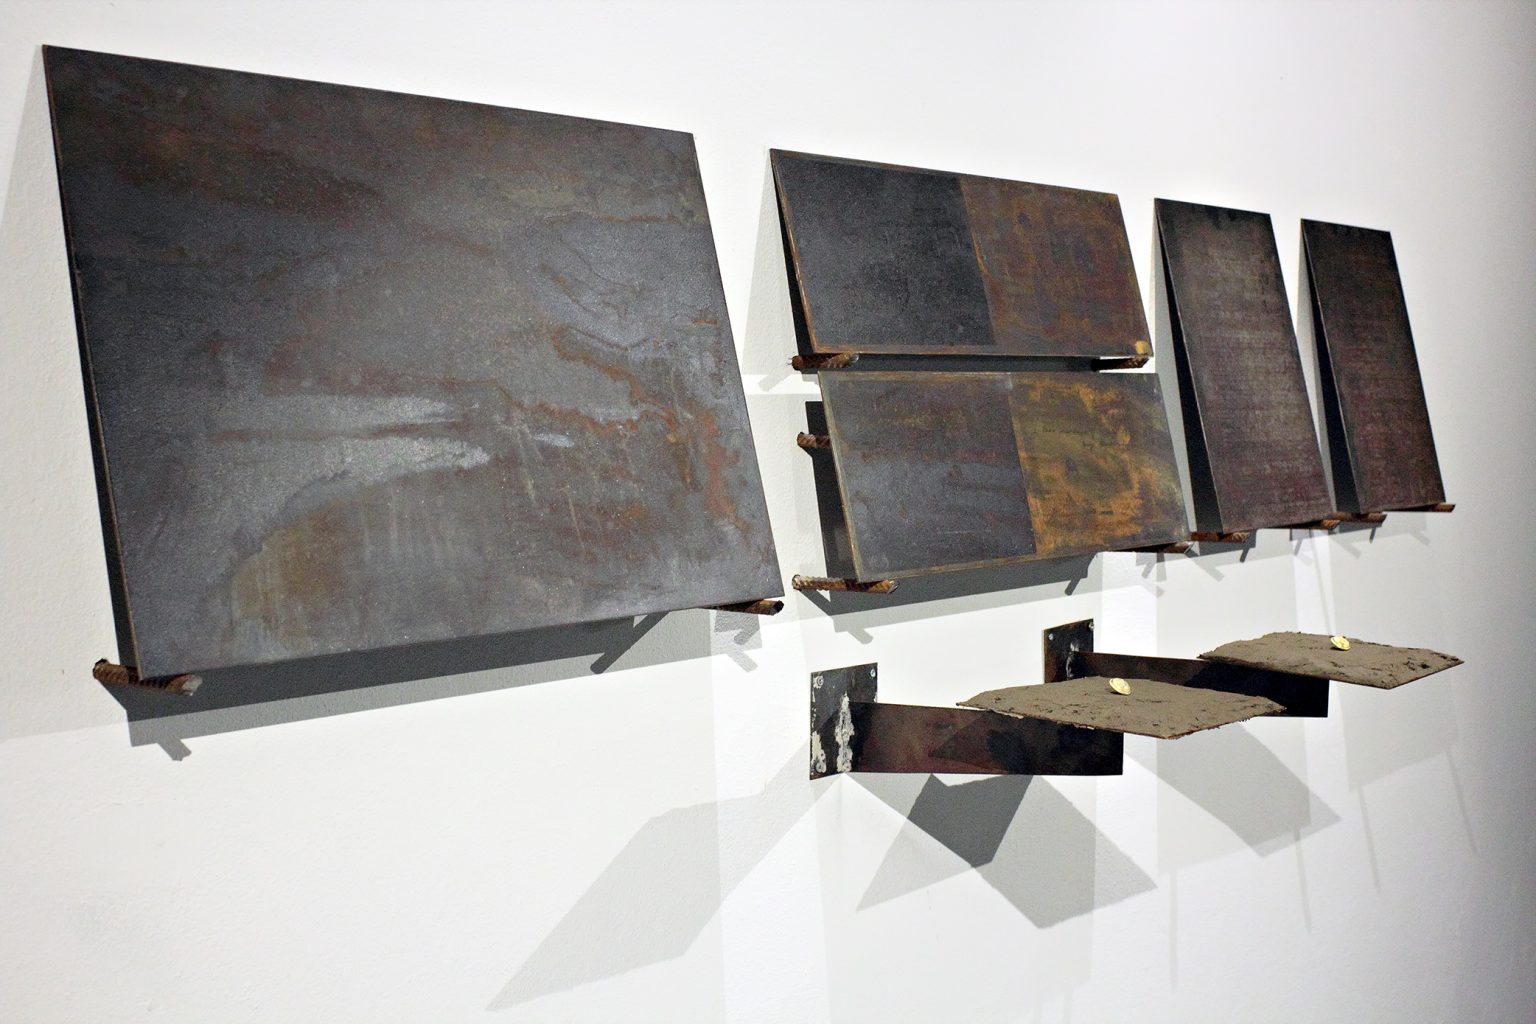 The fever (numismatic value), Steel, soil samples, brass, printing, etching. 2013, installation